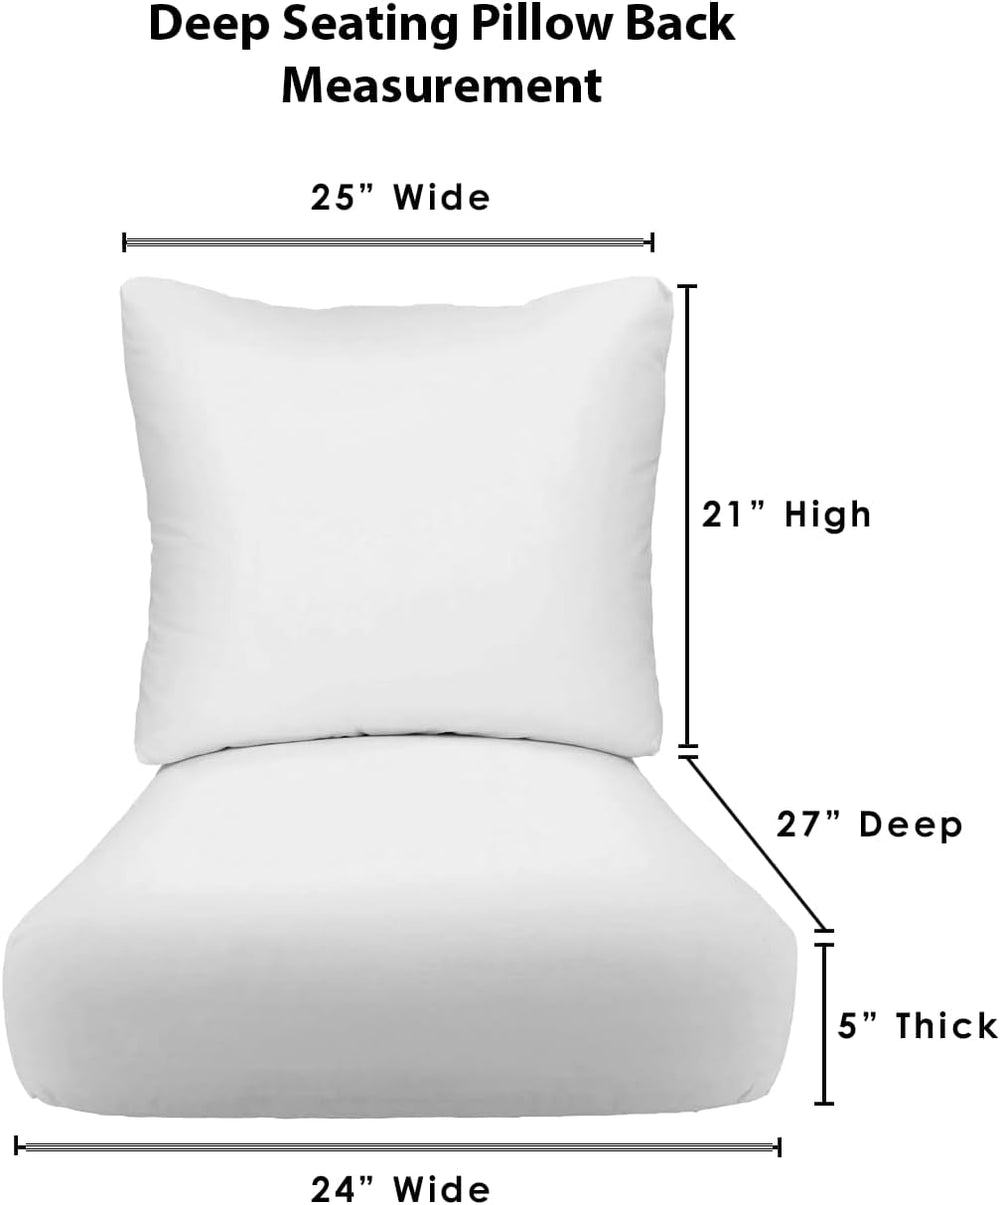 RSH Décor Indoor Outdoor Deep Seating Chair Cushion Set, 24”x 27” x 5” Seat and 25” x 21” Back, Essential Russet - RSH Decor